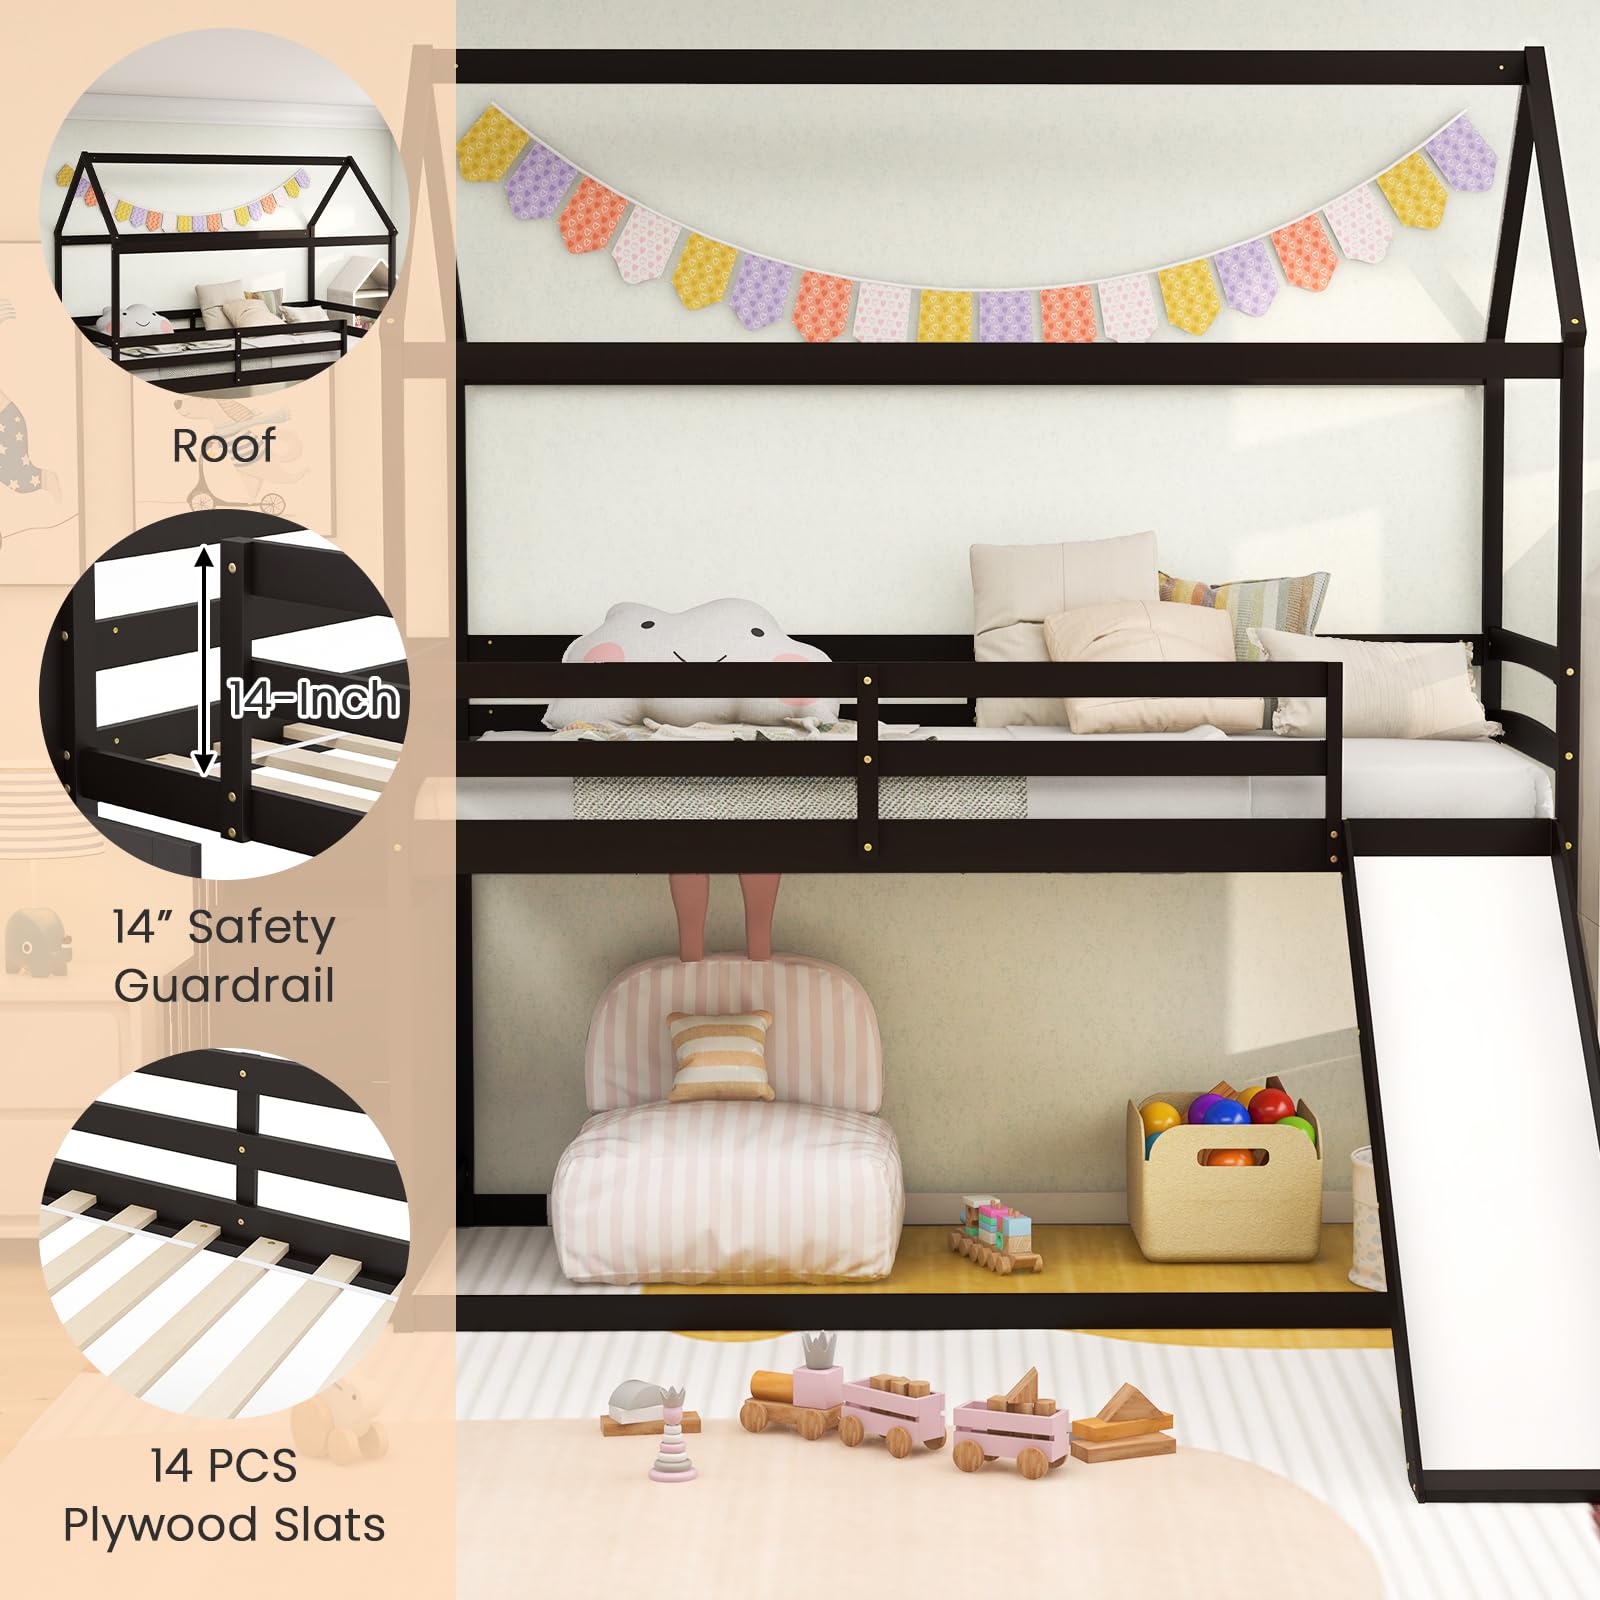 Giantex House Bunk Bed Twin Over Twin with Slide and Storage Stairs, Solid Wood Low Loft Bed Frame with Roof & Guardrail